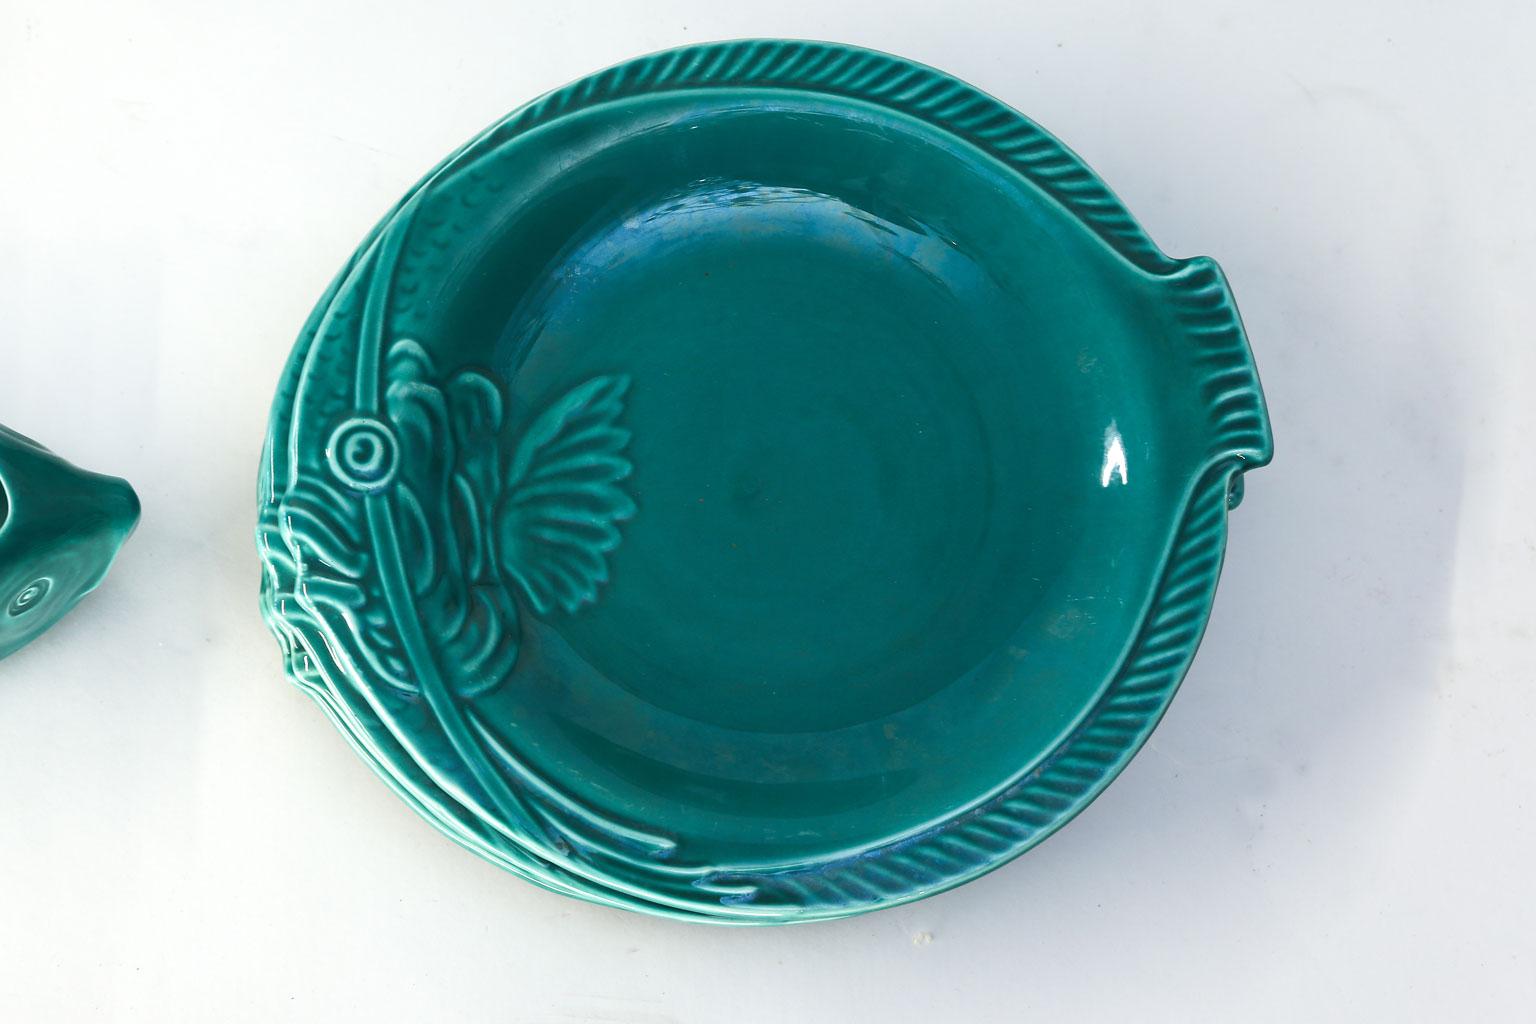 Set of teal fish-shape ceramic dishware from the South of France: ten plates, one round platter, one long large platter and one saucière, (mid-20th century).

Plates measure: 0.88 inches high x 11.25 inches wide x 10.13 inches deep
Round platter